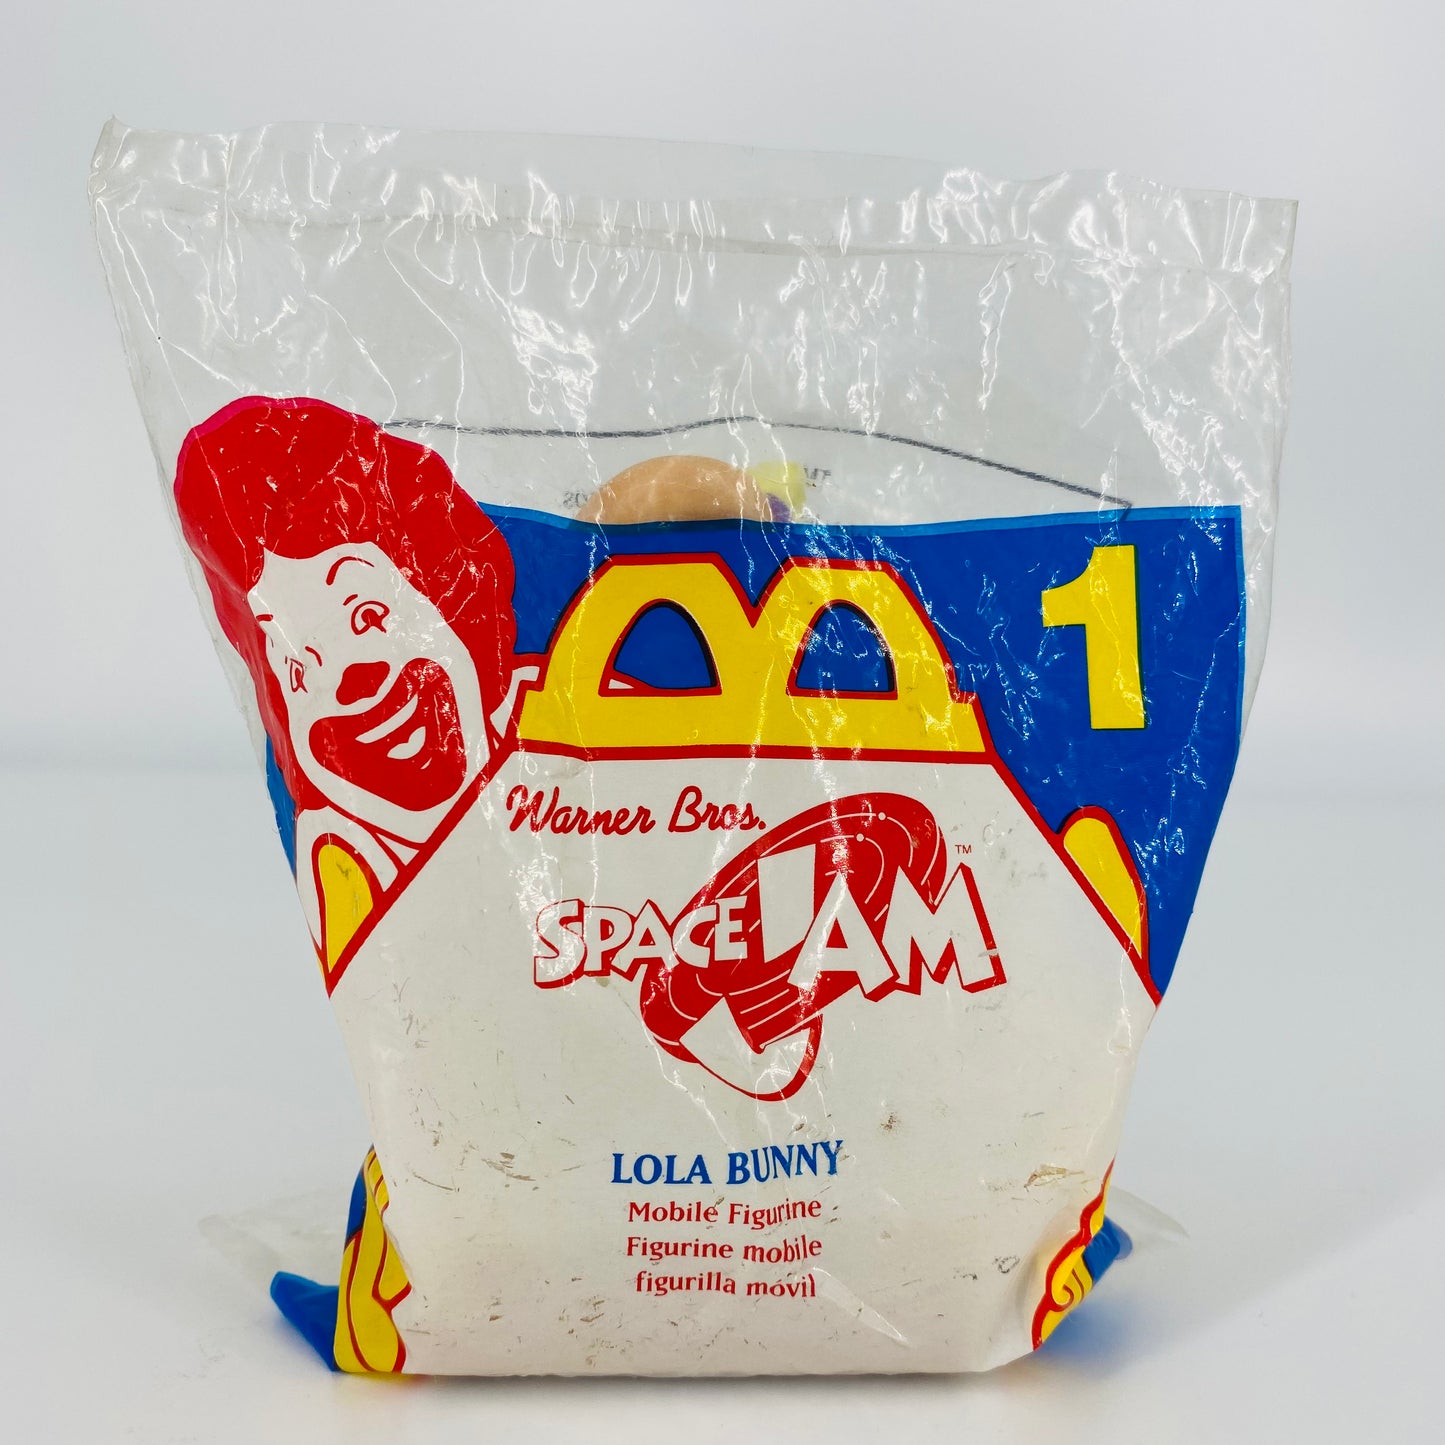 Space Jam Lola Bunny McDonald's Happy Meal toy (1996) bagged